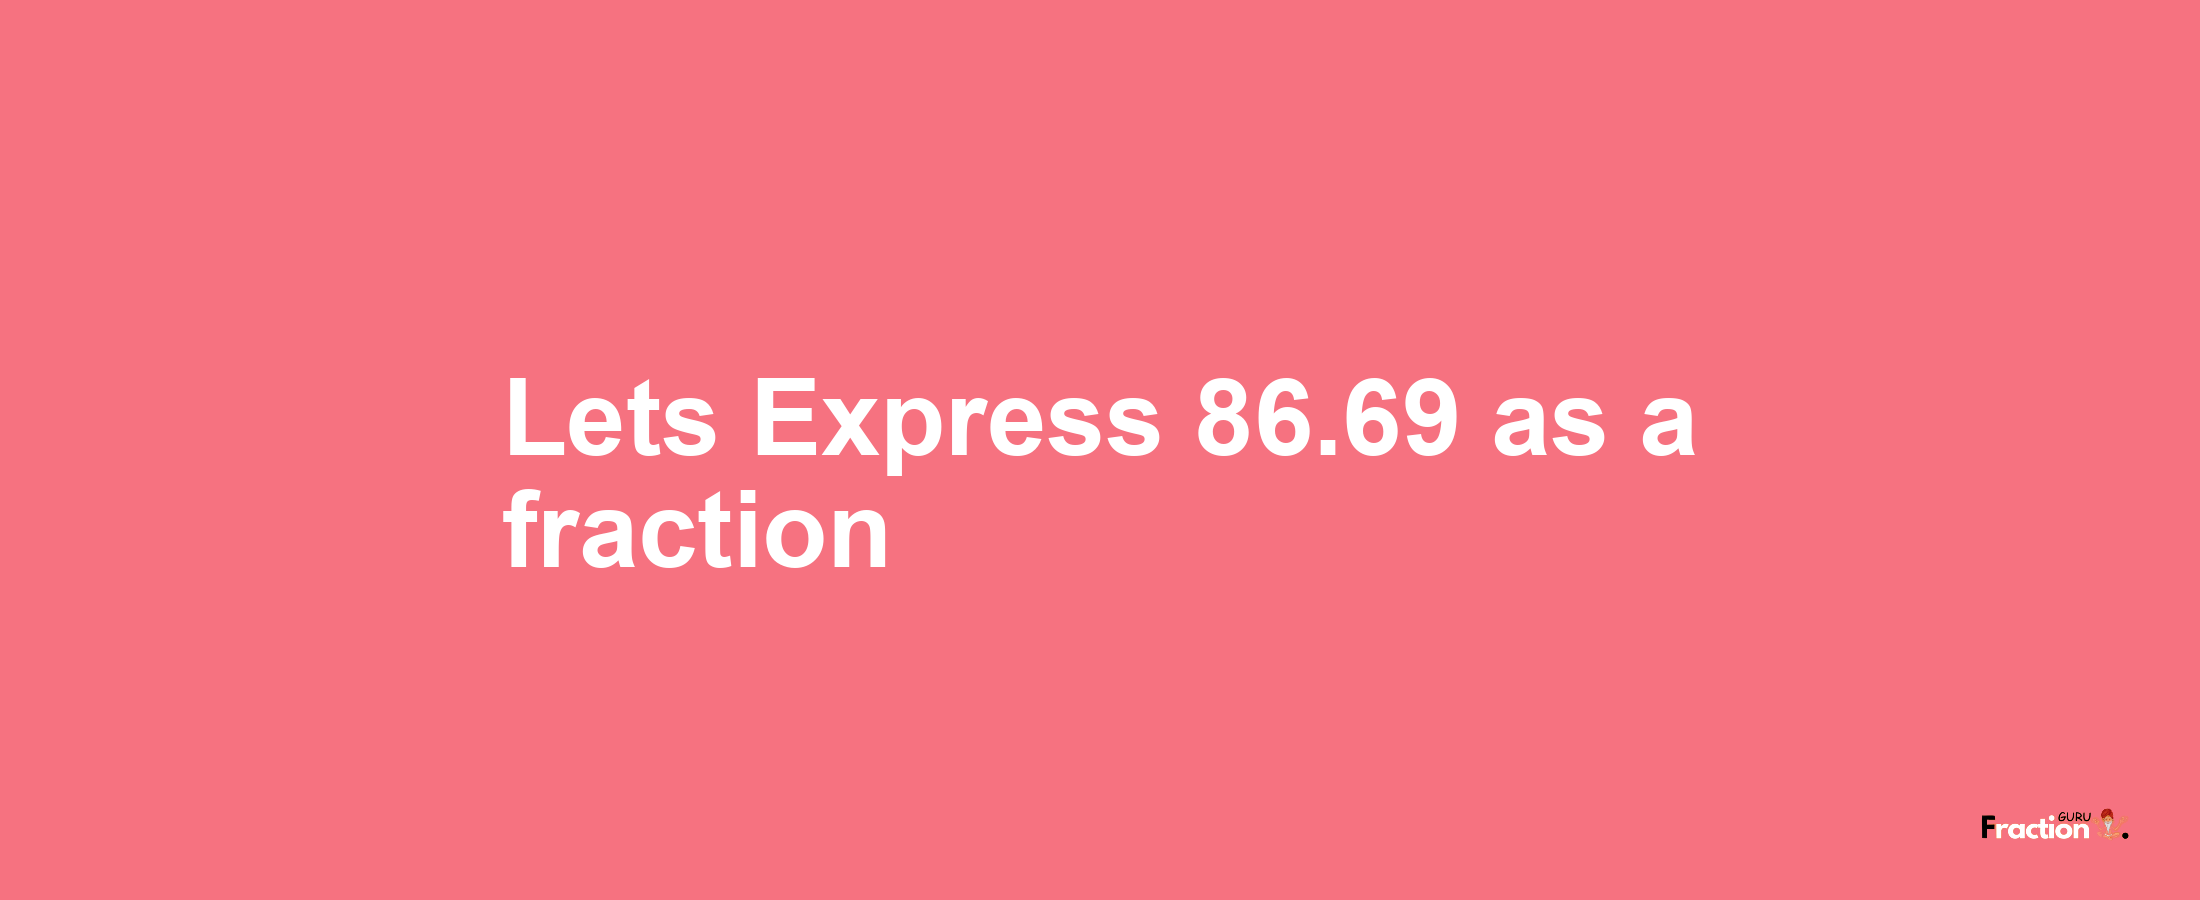 Lets Express 86.69 as afraction